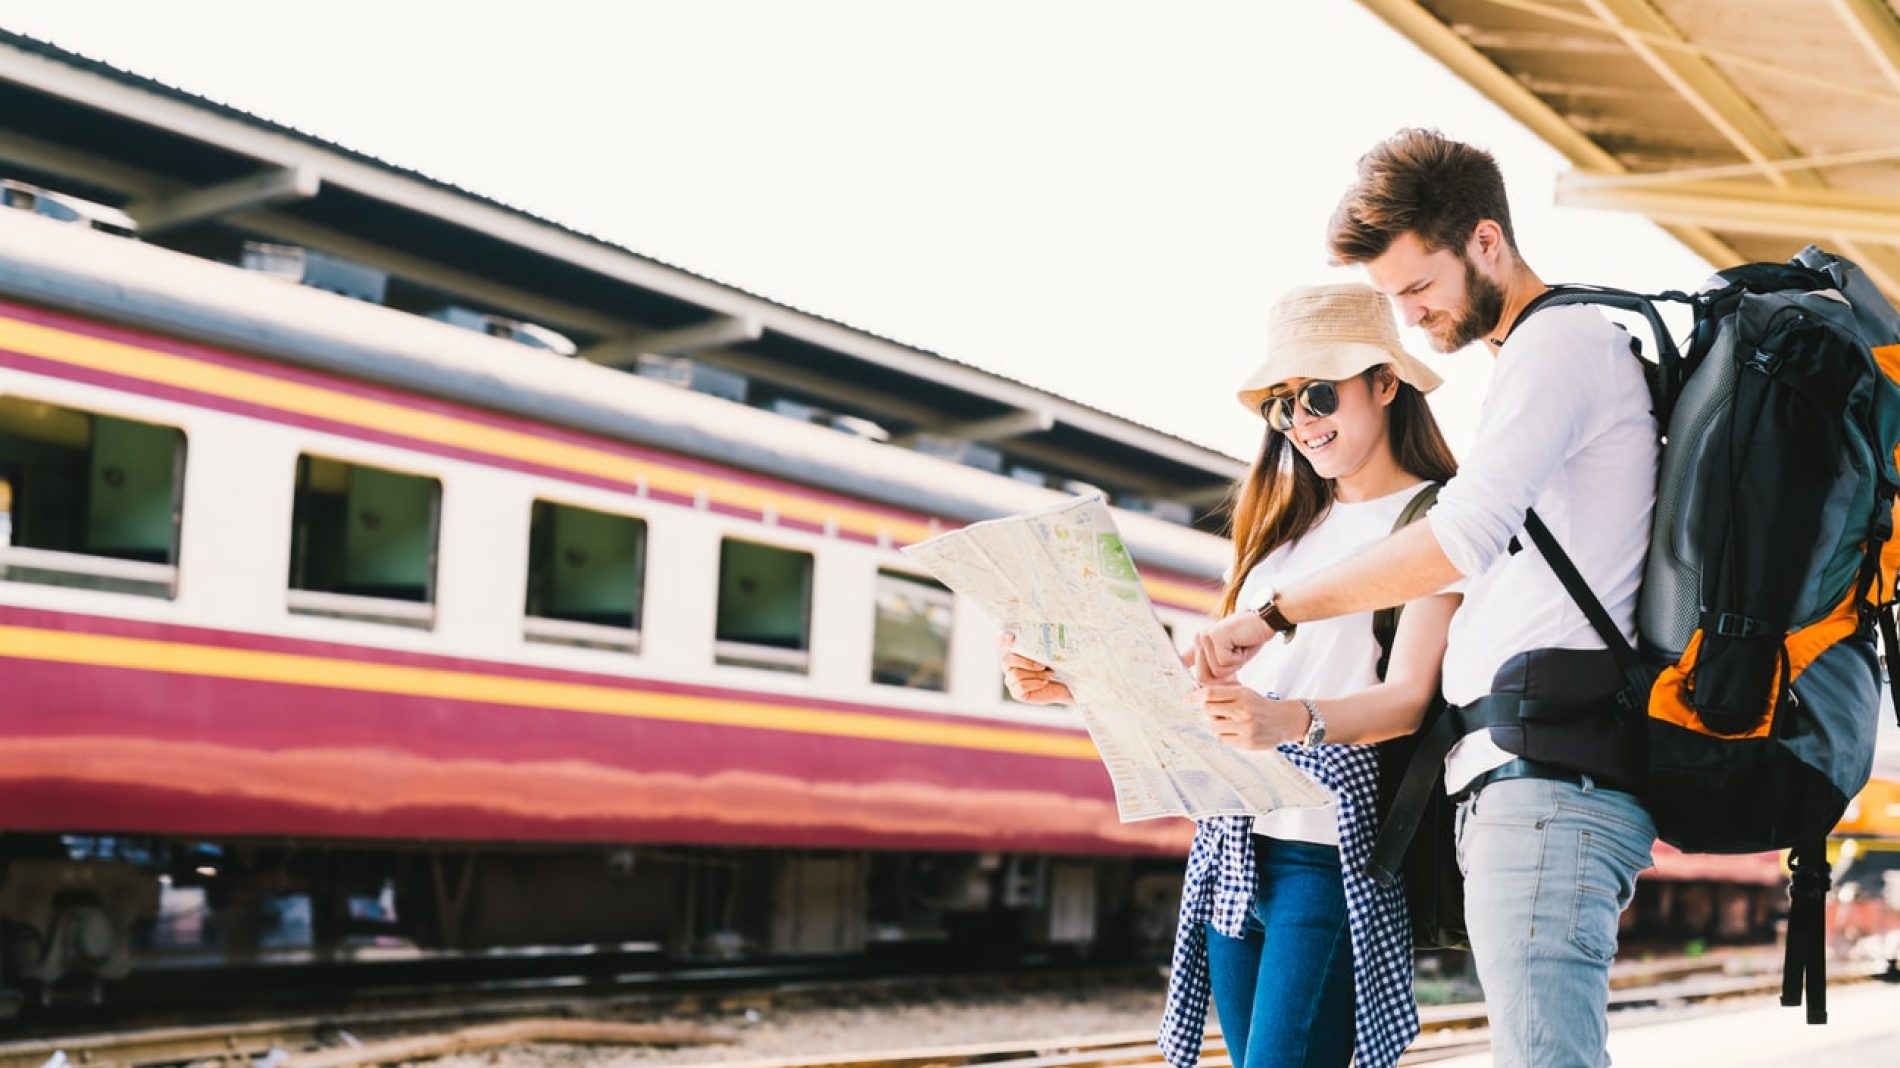 Two people in a train station looking at a map